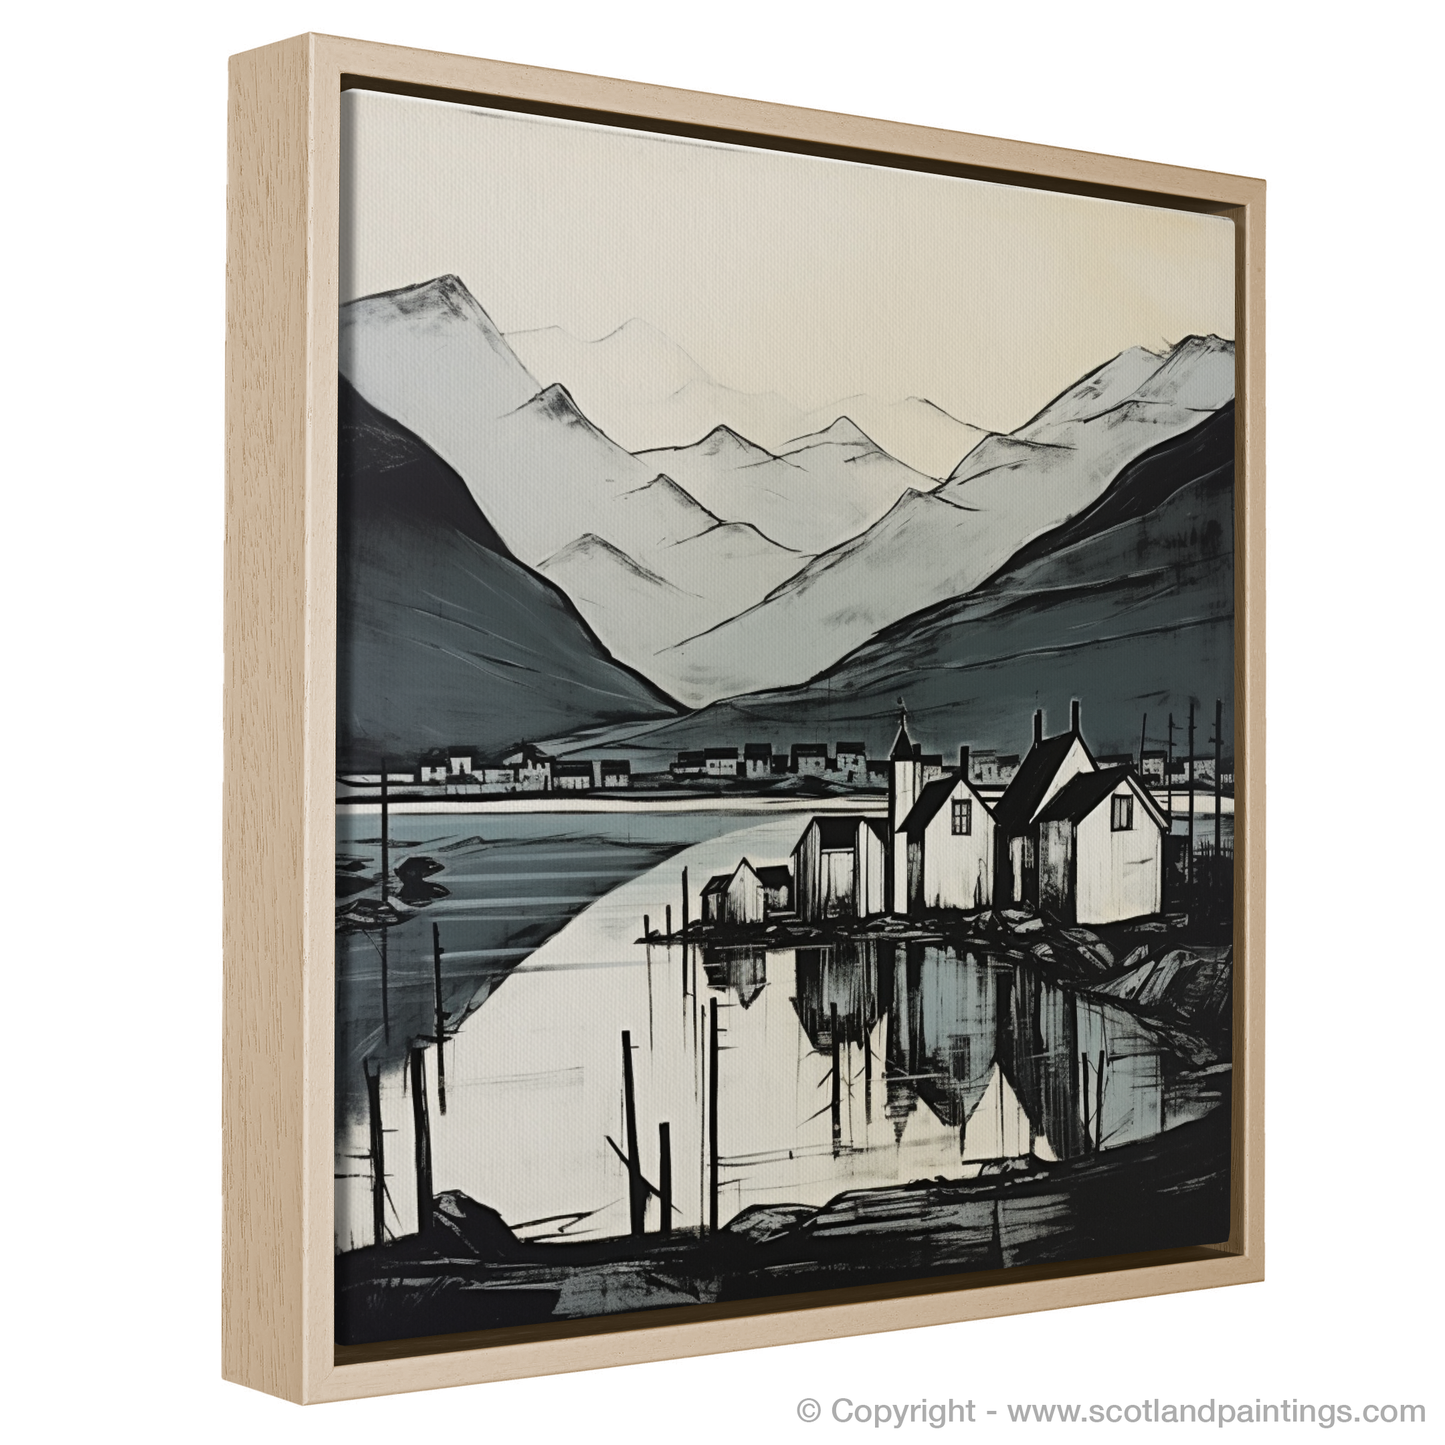 Painting and Art Print of Fort William, Highlands. Fort William Reflections: Highland Serenity in Monochrome.